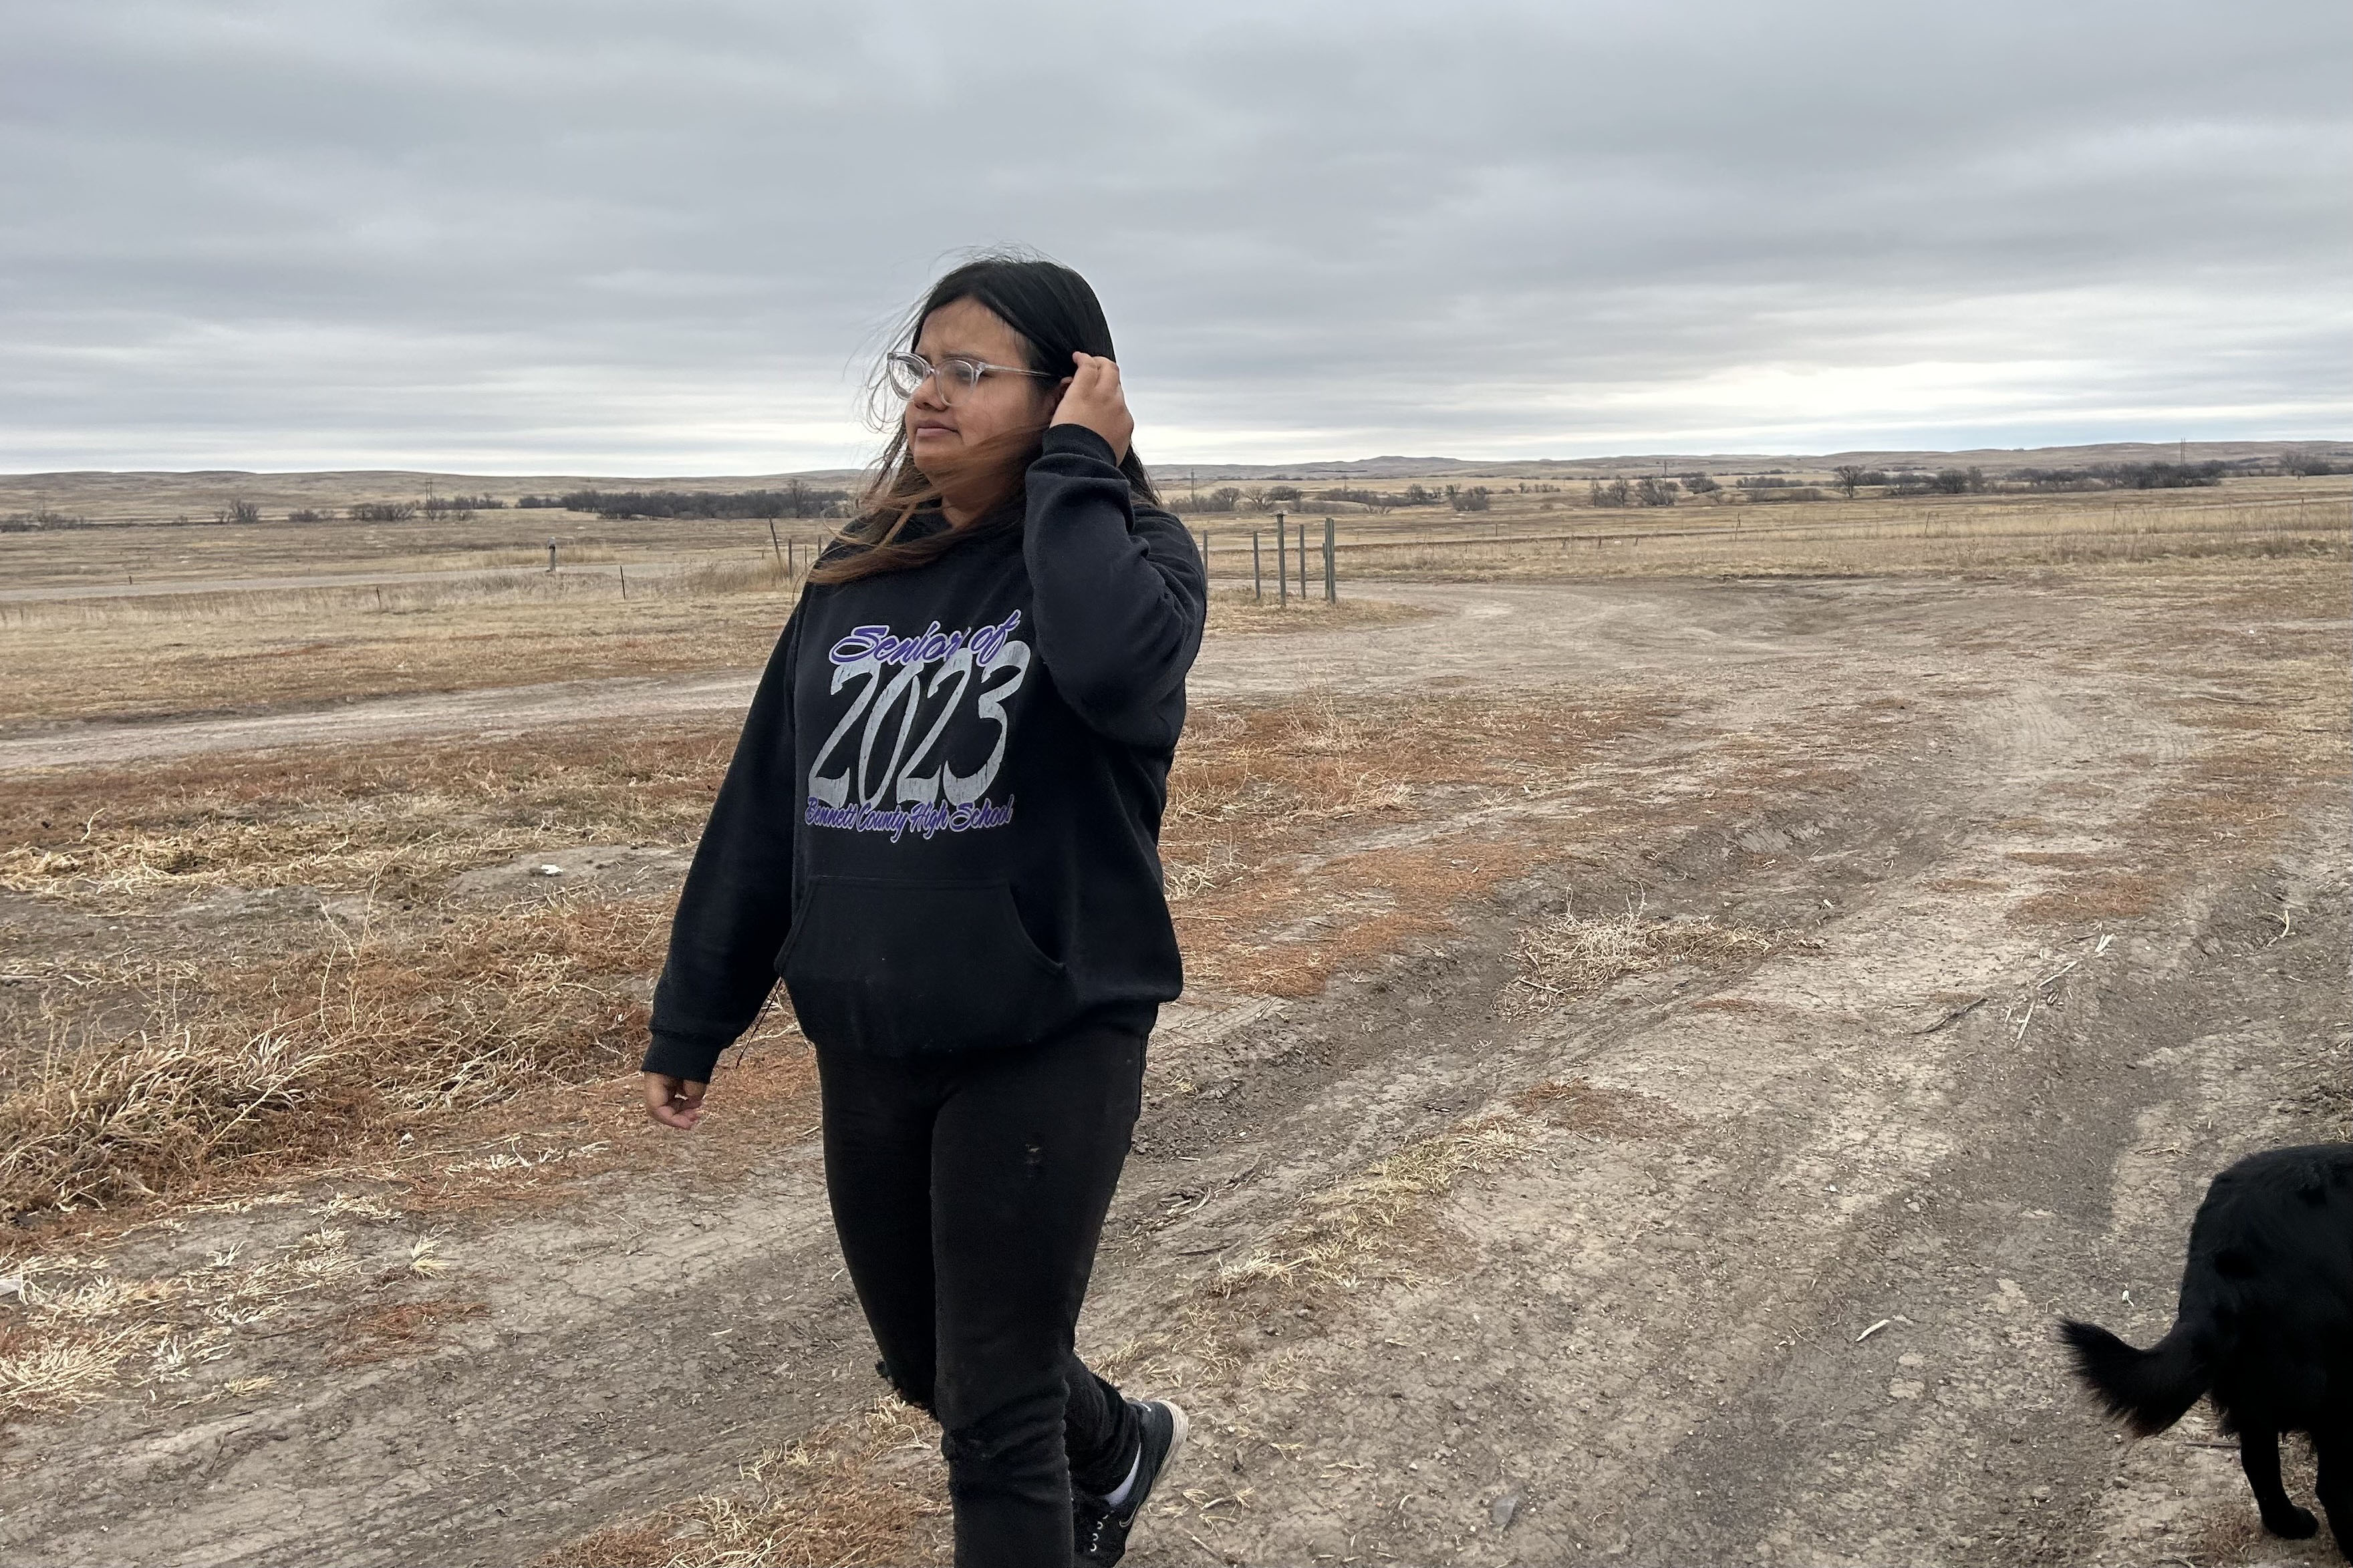 Katherine Goodlow crosses her family’s driveway in Hisle on the Pine Ridge Reservation in South Dakota. The sky is overcast and the landscape shows a dirt road and dry, grassy fields.